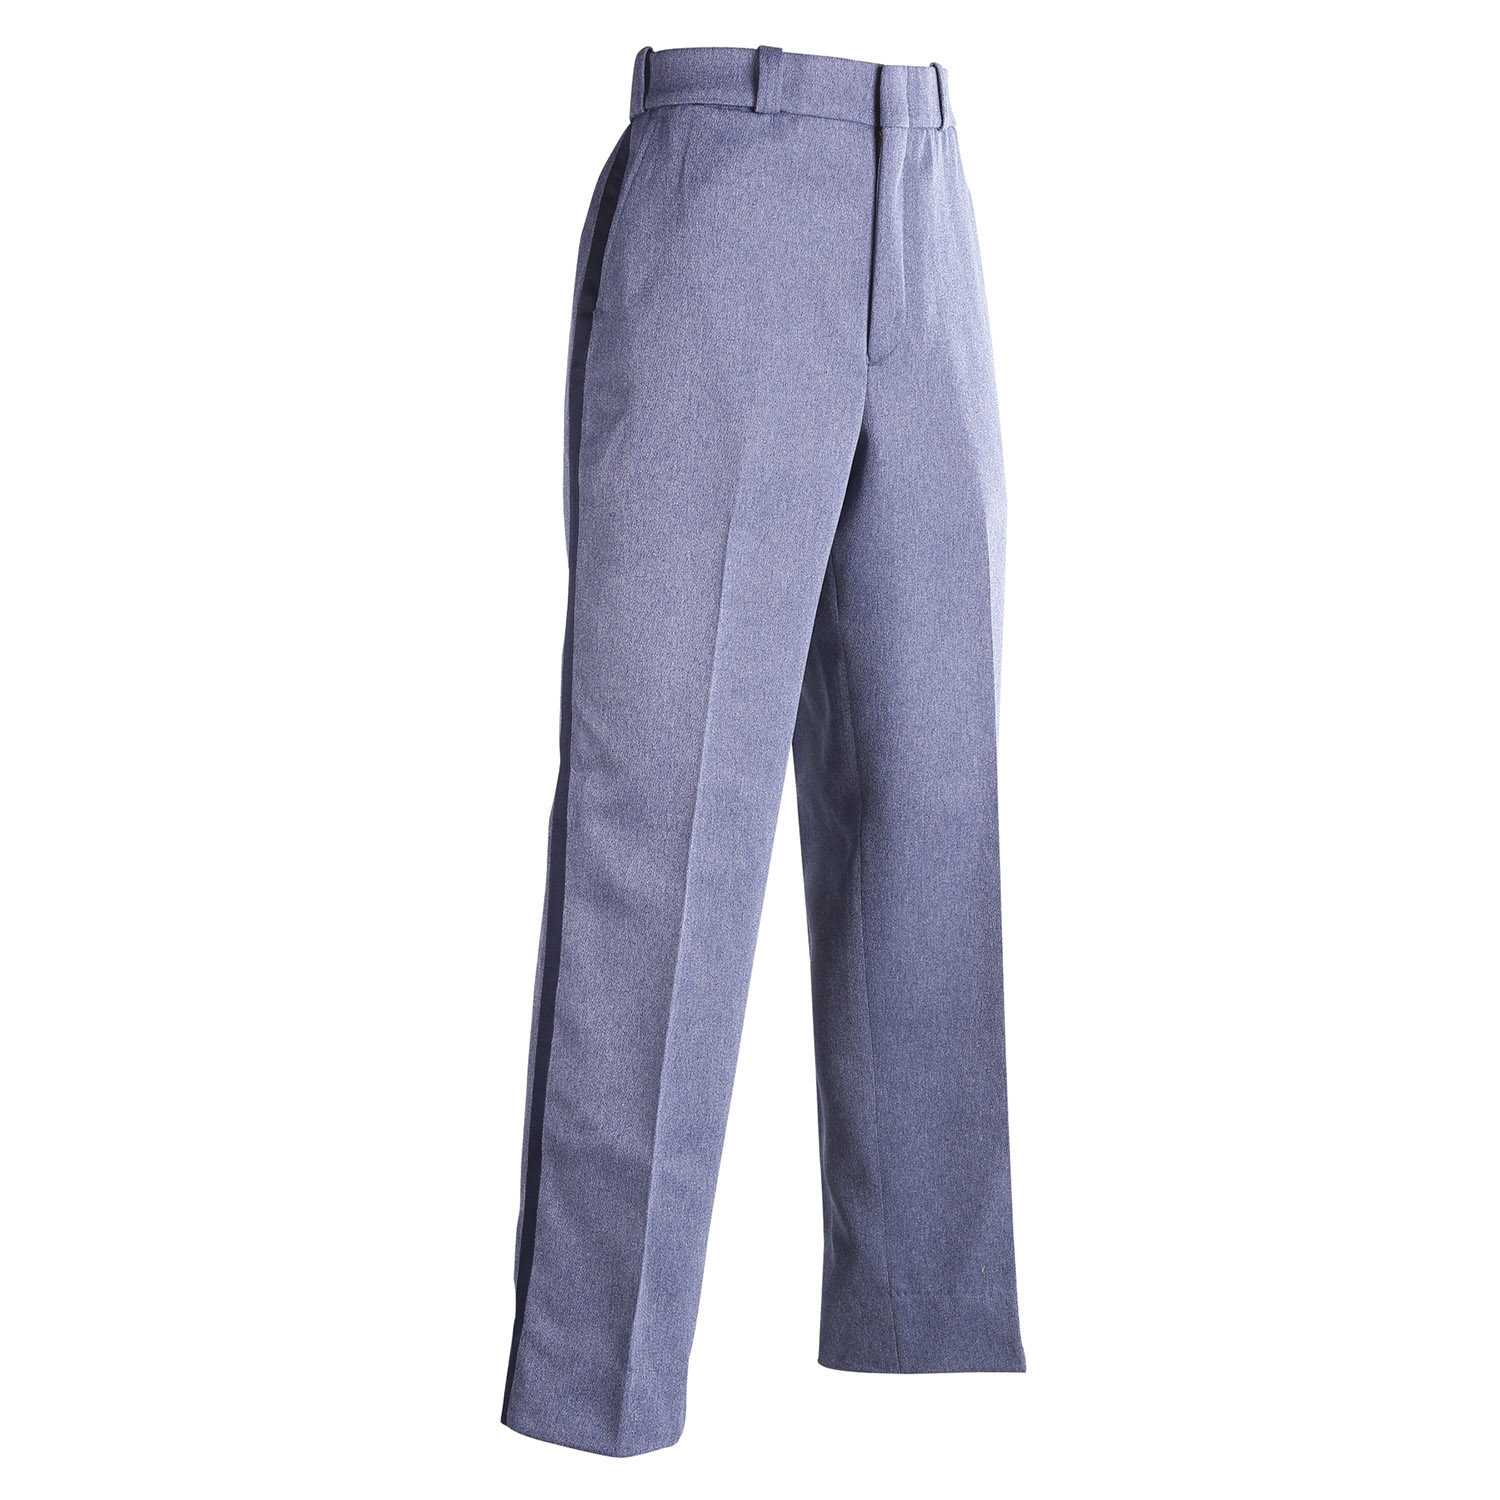 MENS WINTER-WEIGHT RELAXED FIT TROUSER W/FREEDOM FIT